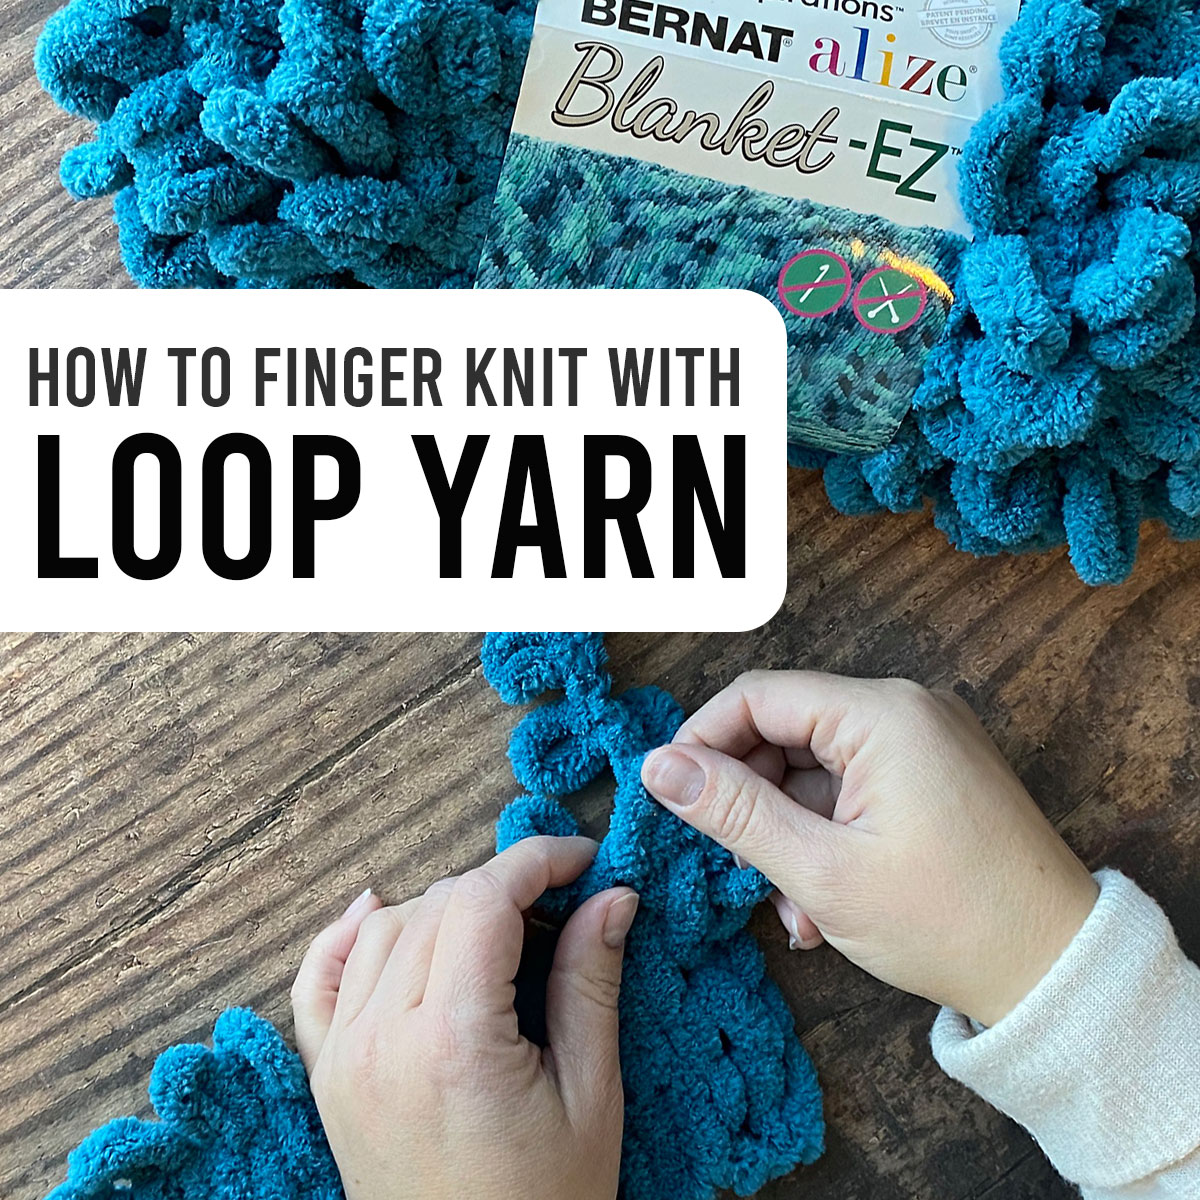 How to Finger Knit: 2 Easy Ways for Beginners!